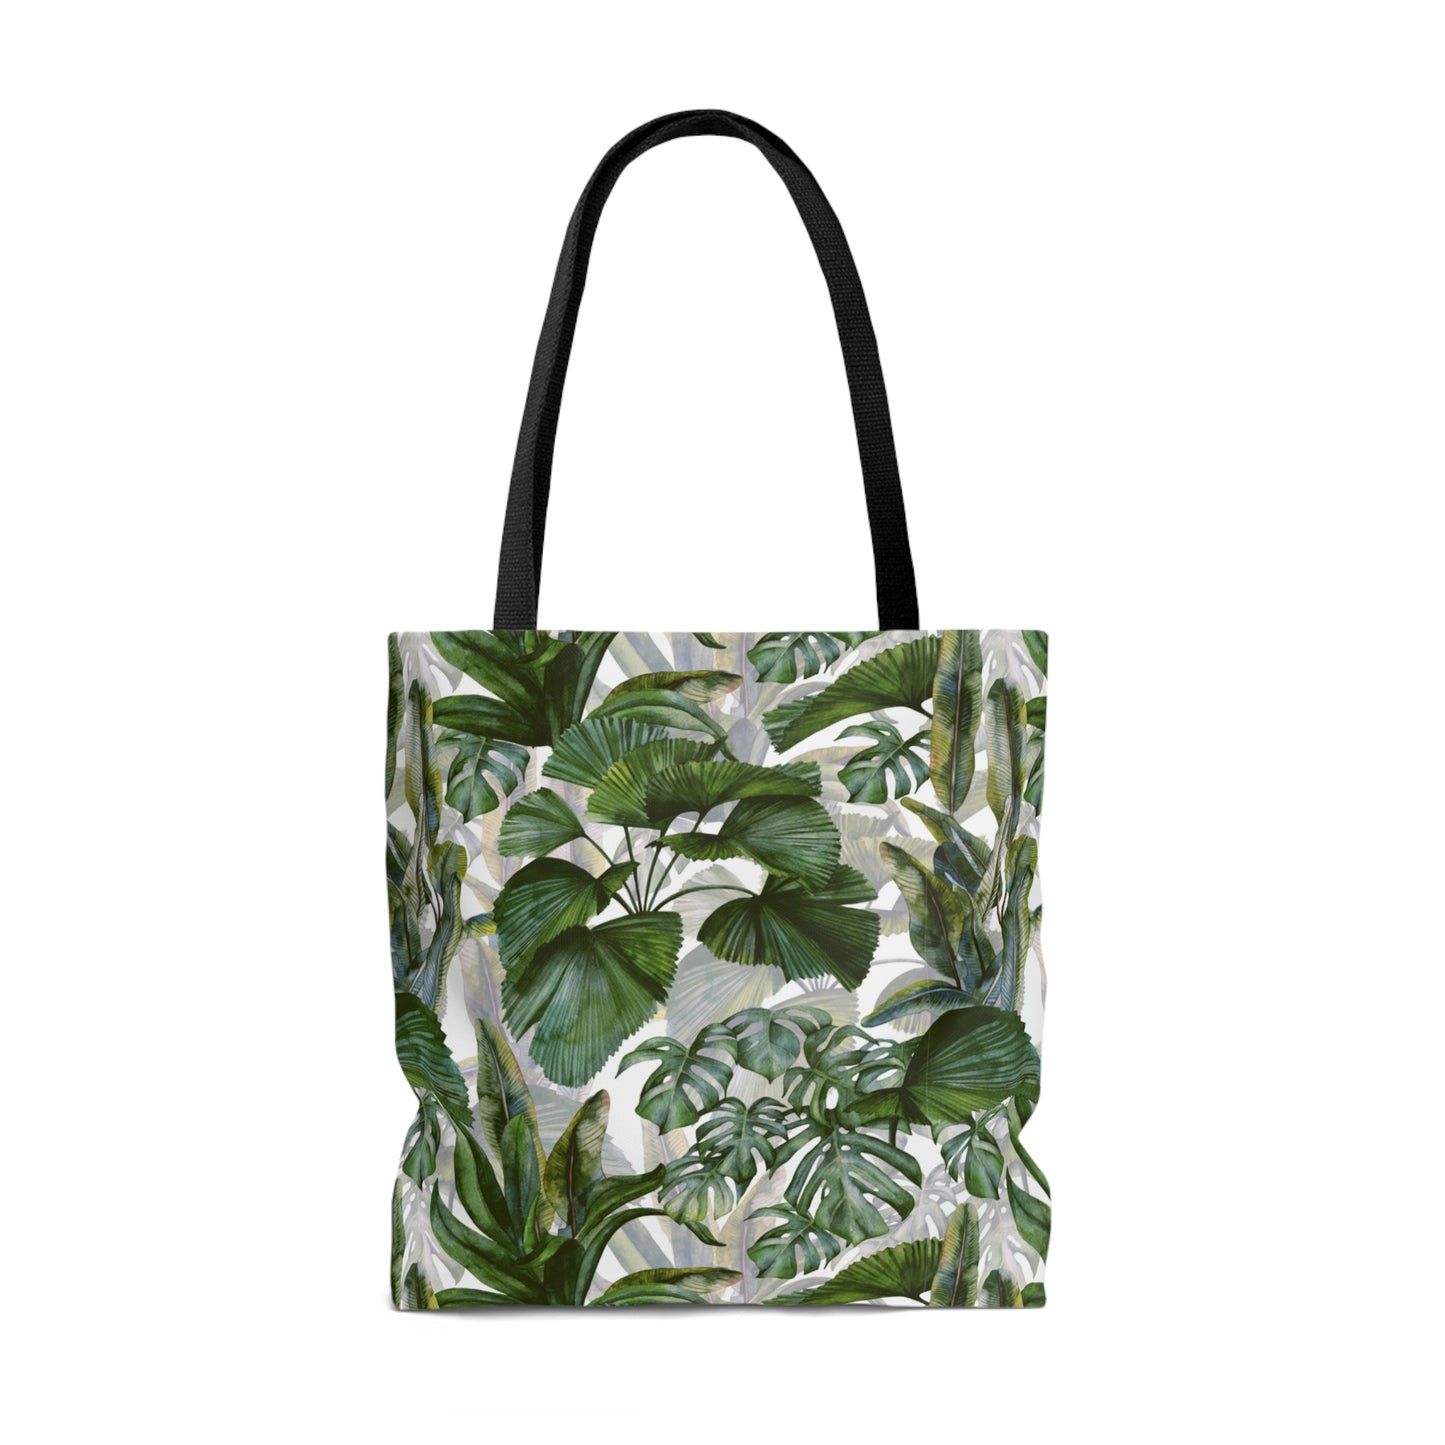 Plant lover bag. Plant Tote Bag. Gift for plant mom, plant lady or plant lover. Plant themed bag. Library bag with plants.